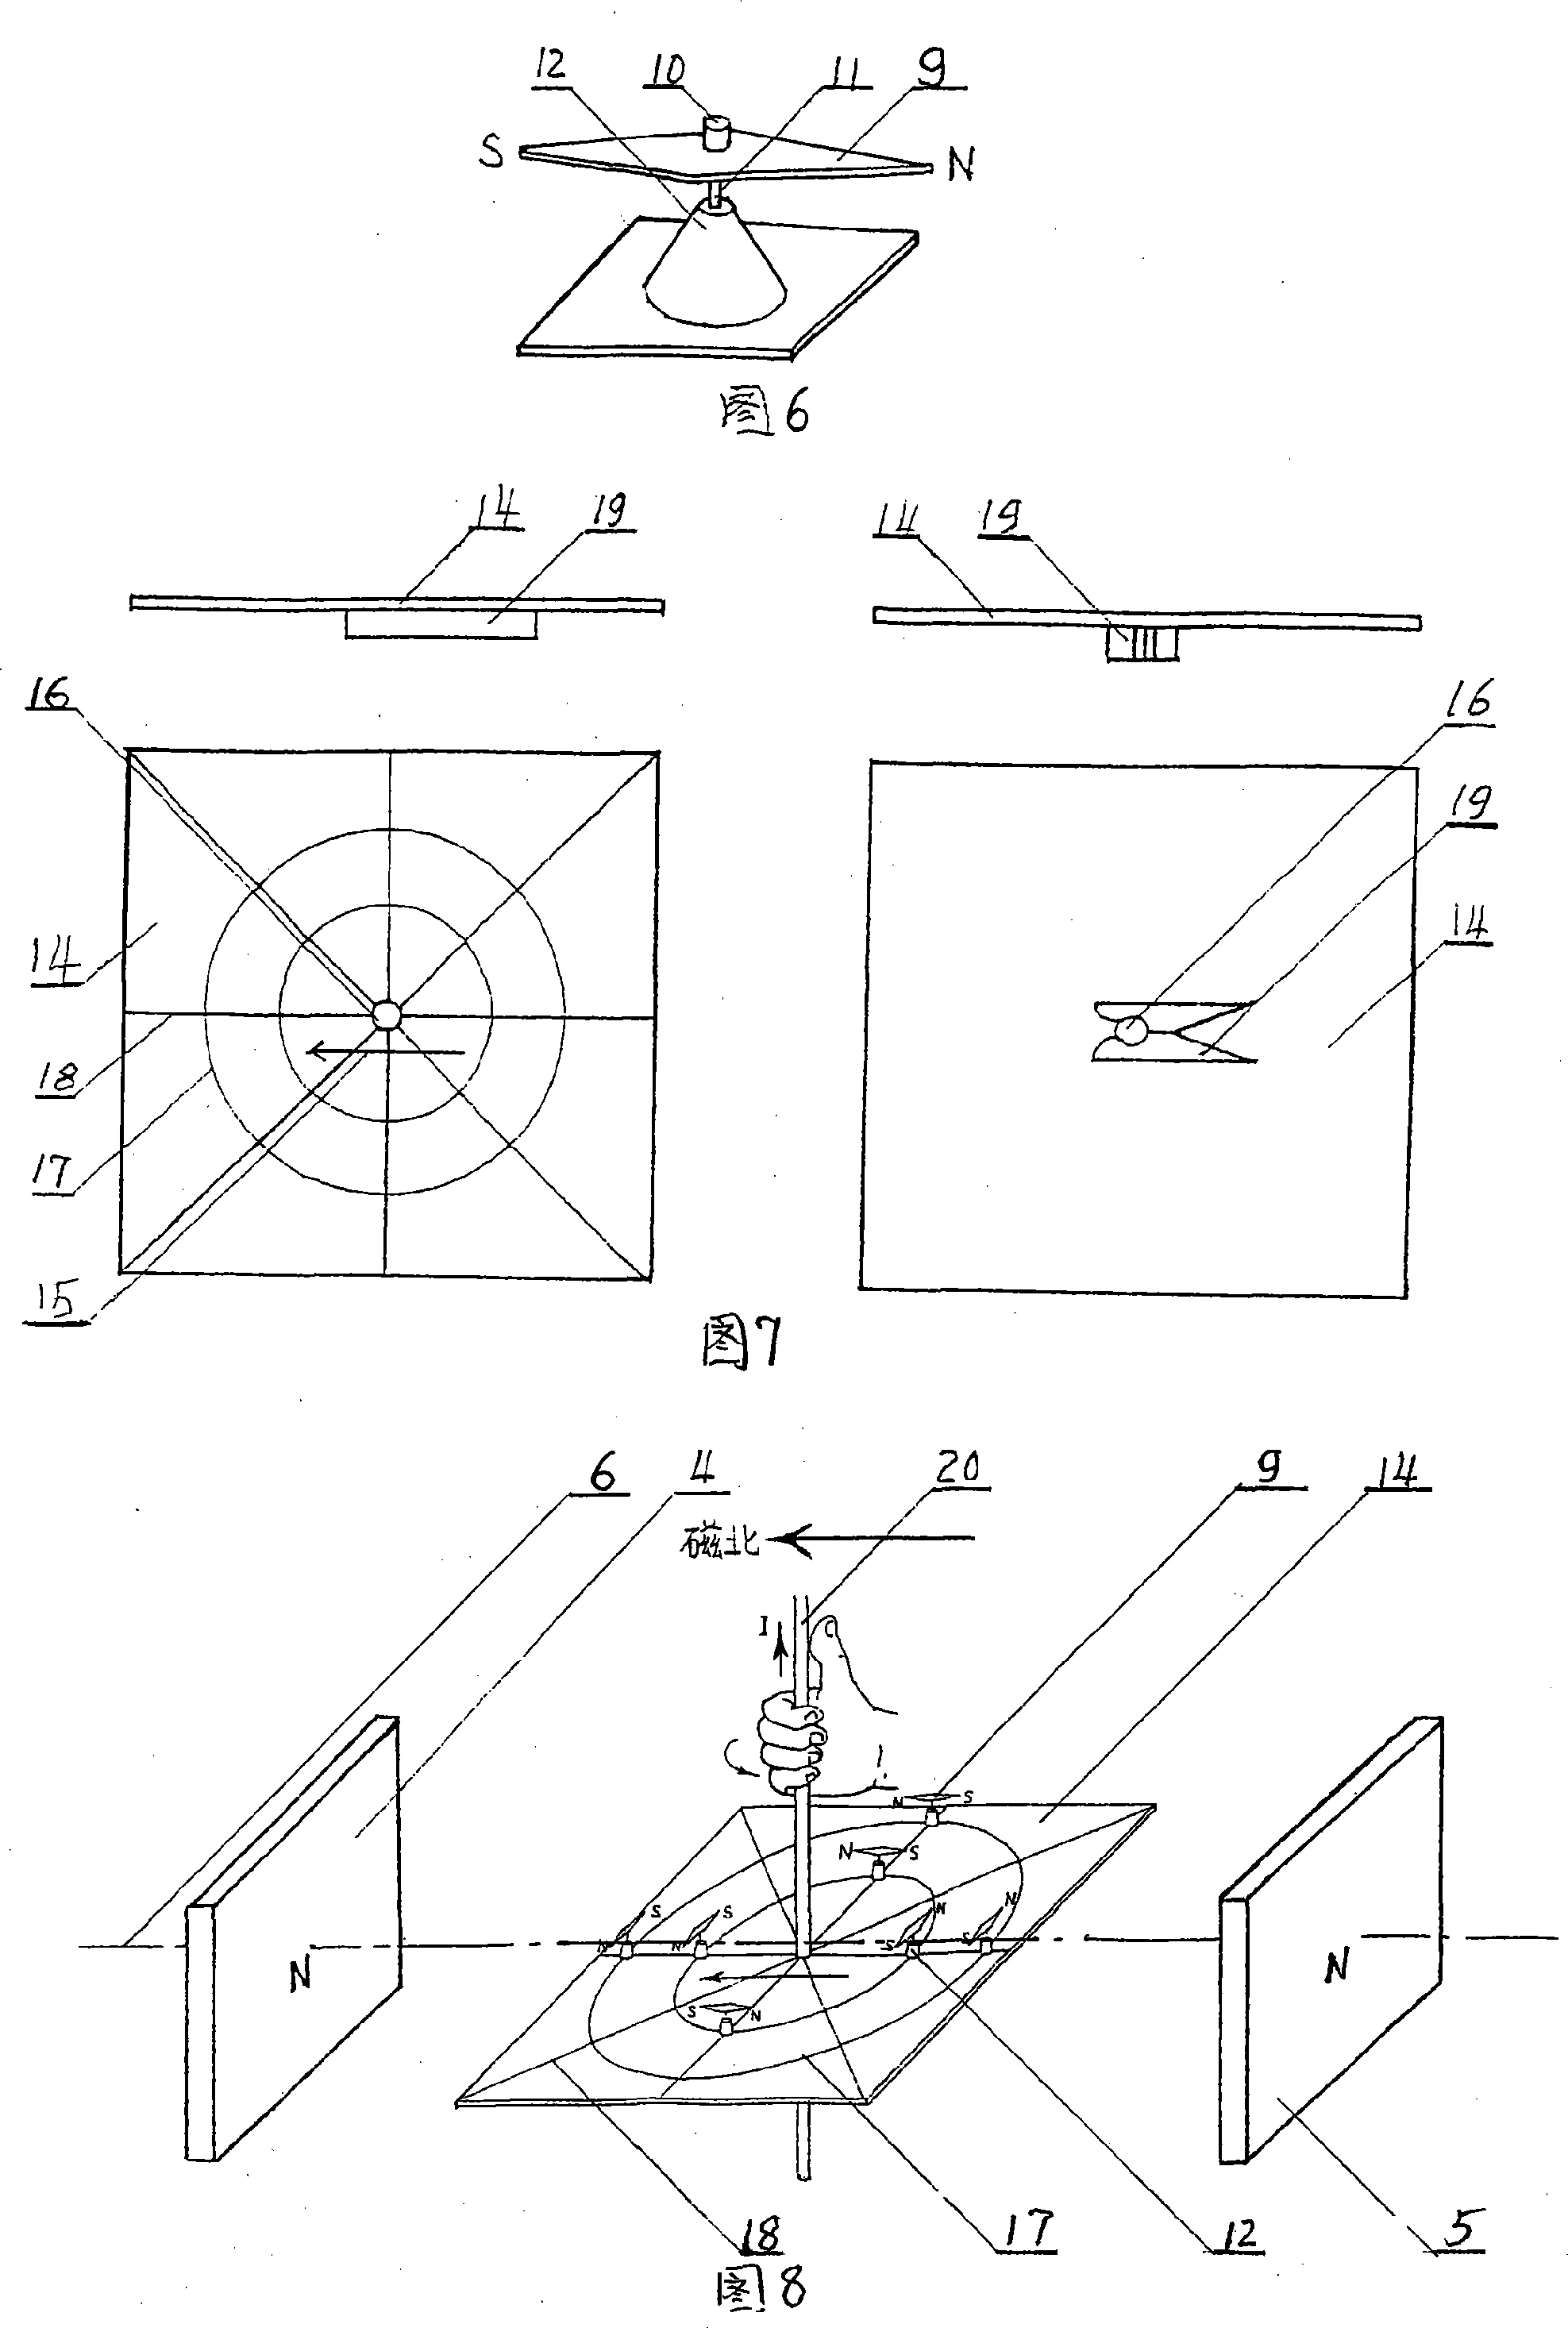 Method for geomagnet elimination interfering Ampere's rule experiment and instrument employing the method